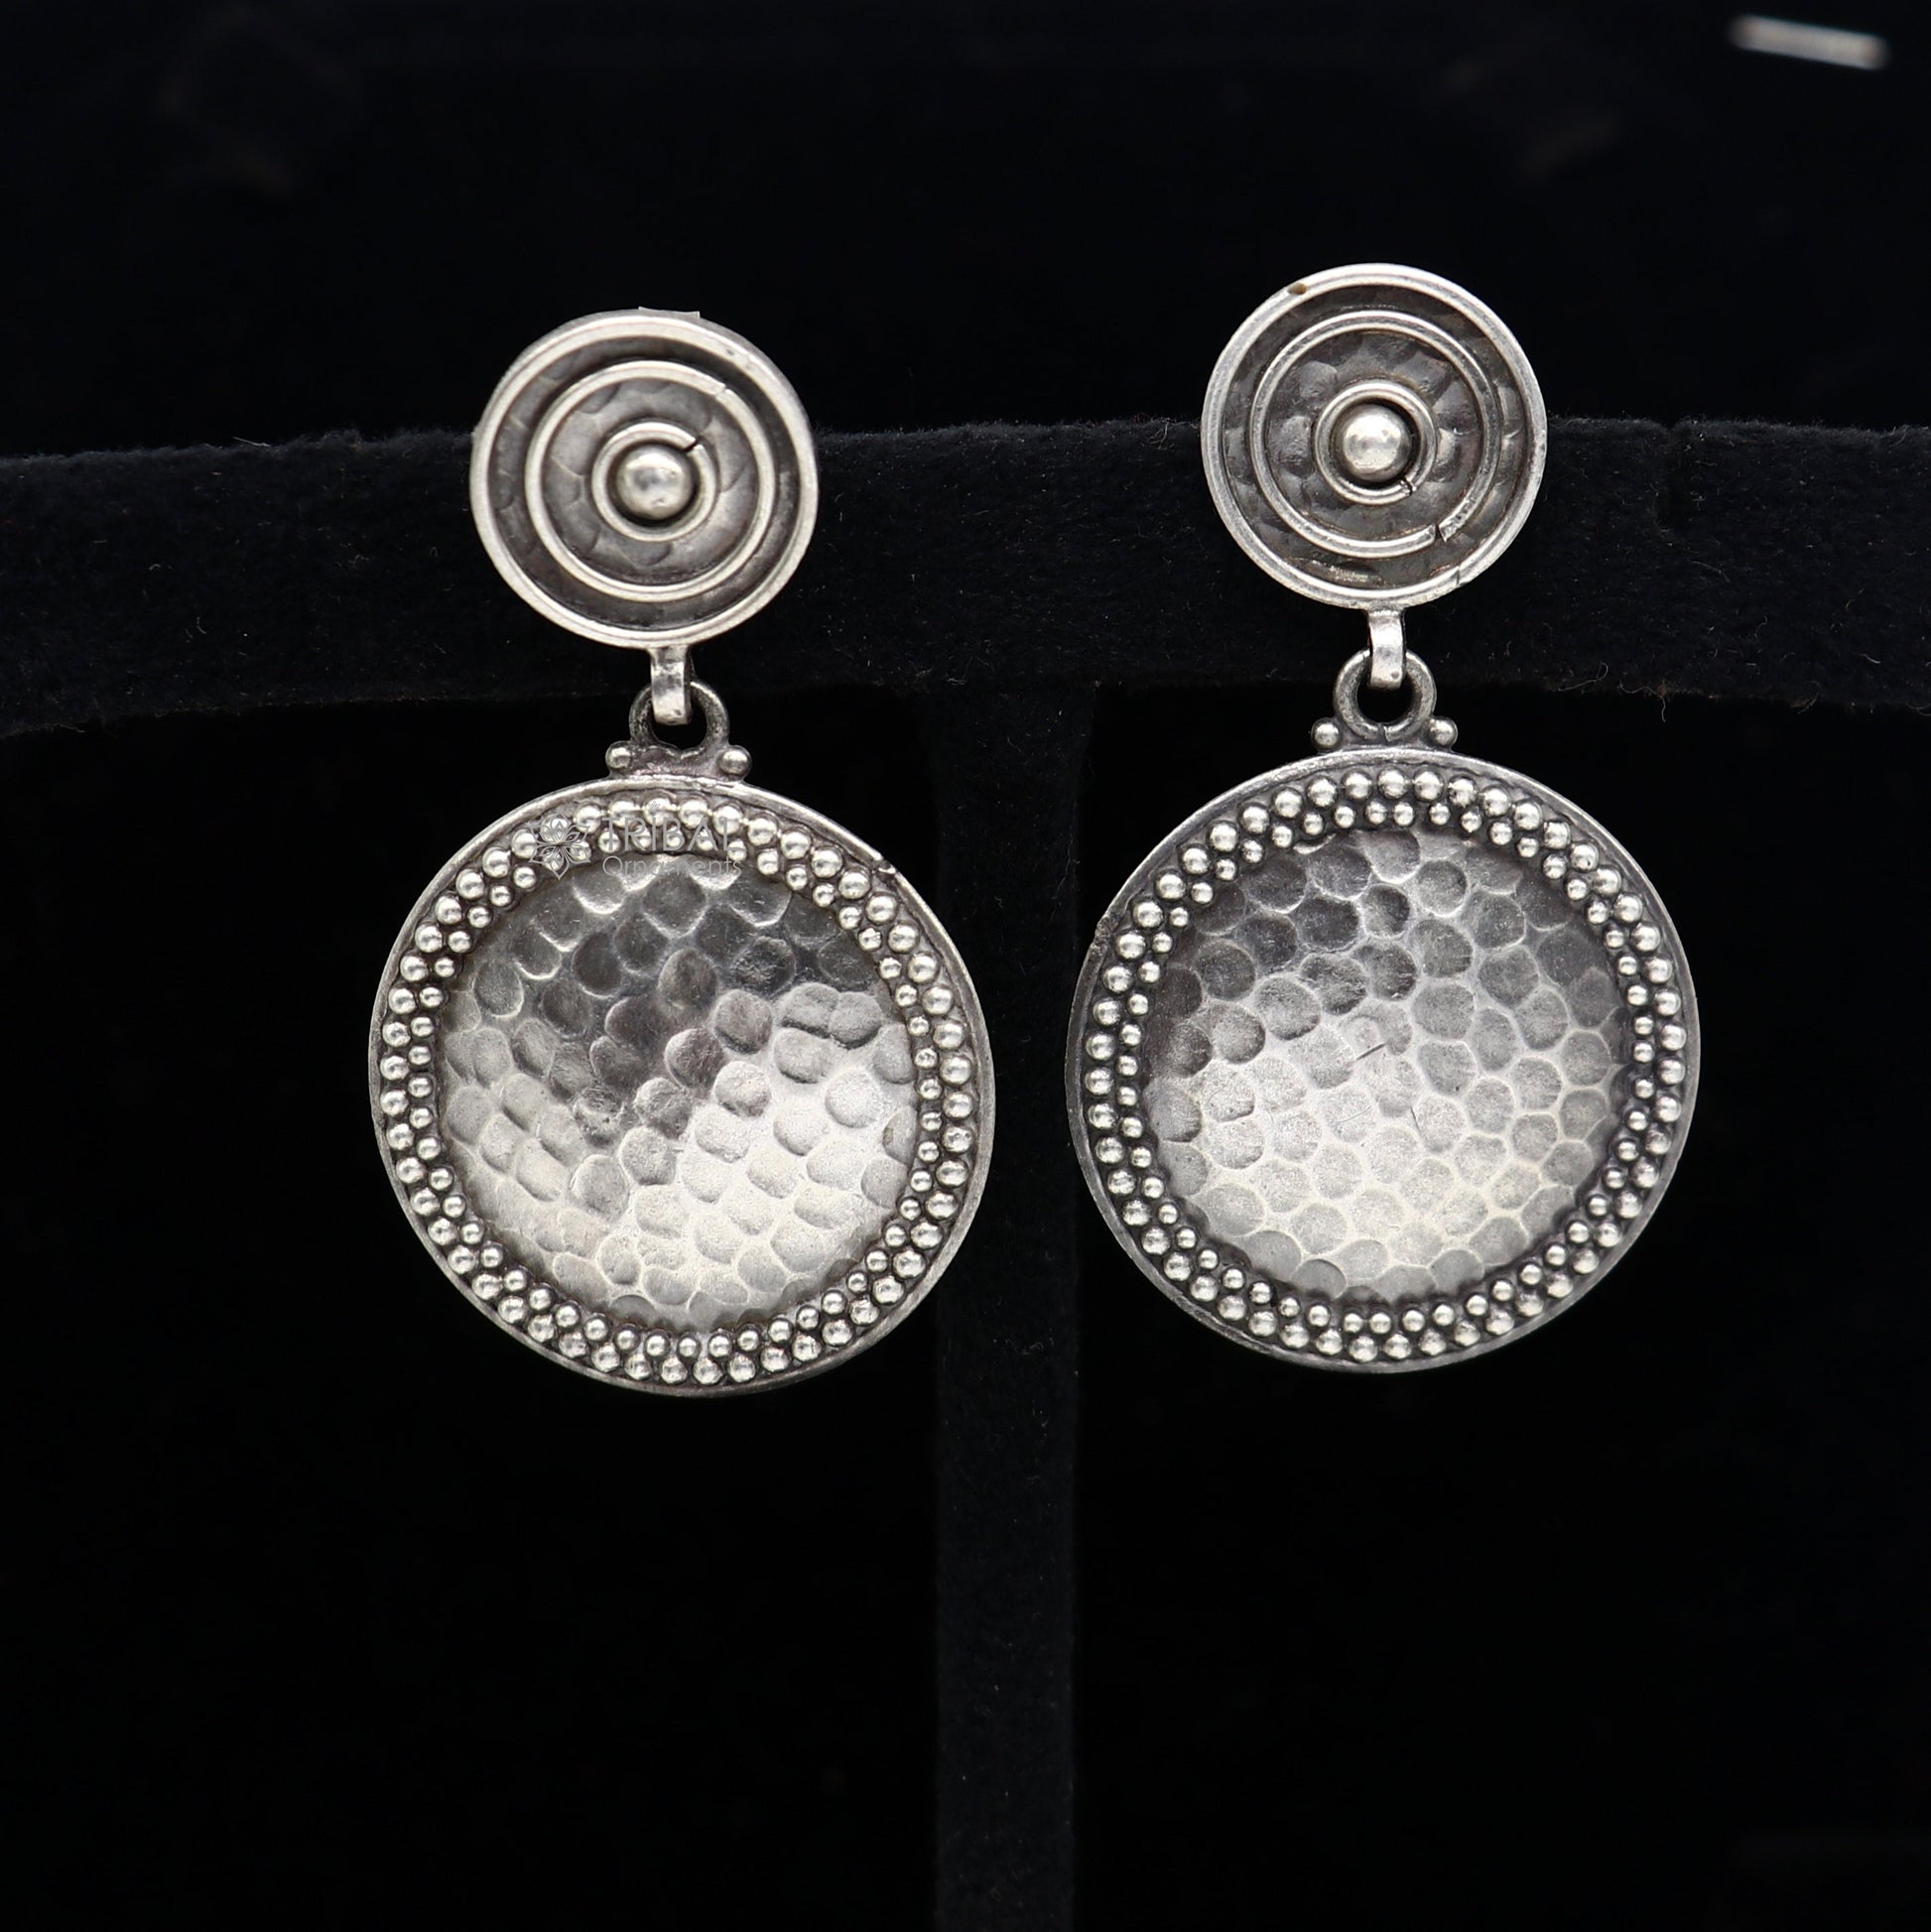 Exclusive stylish 925 Sterling silver traditional cultural design drop dangler fancy earrings, best party functional Navratri jewelry s1239 - TRIBAL ORNAMENTS